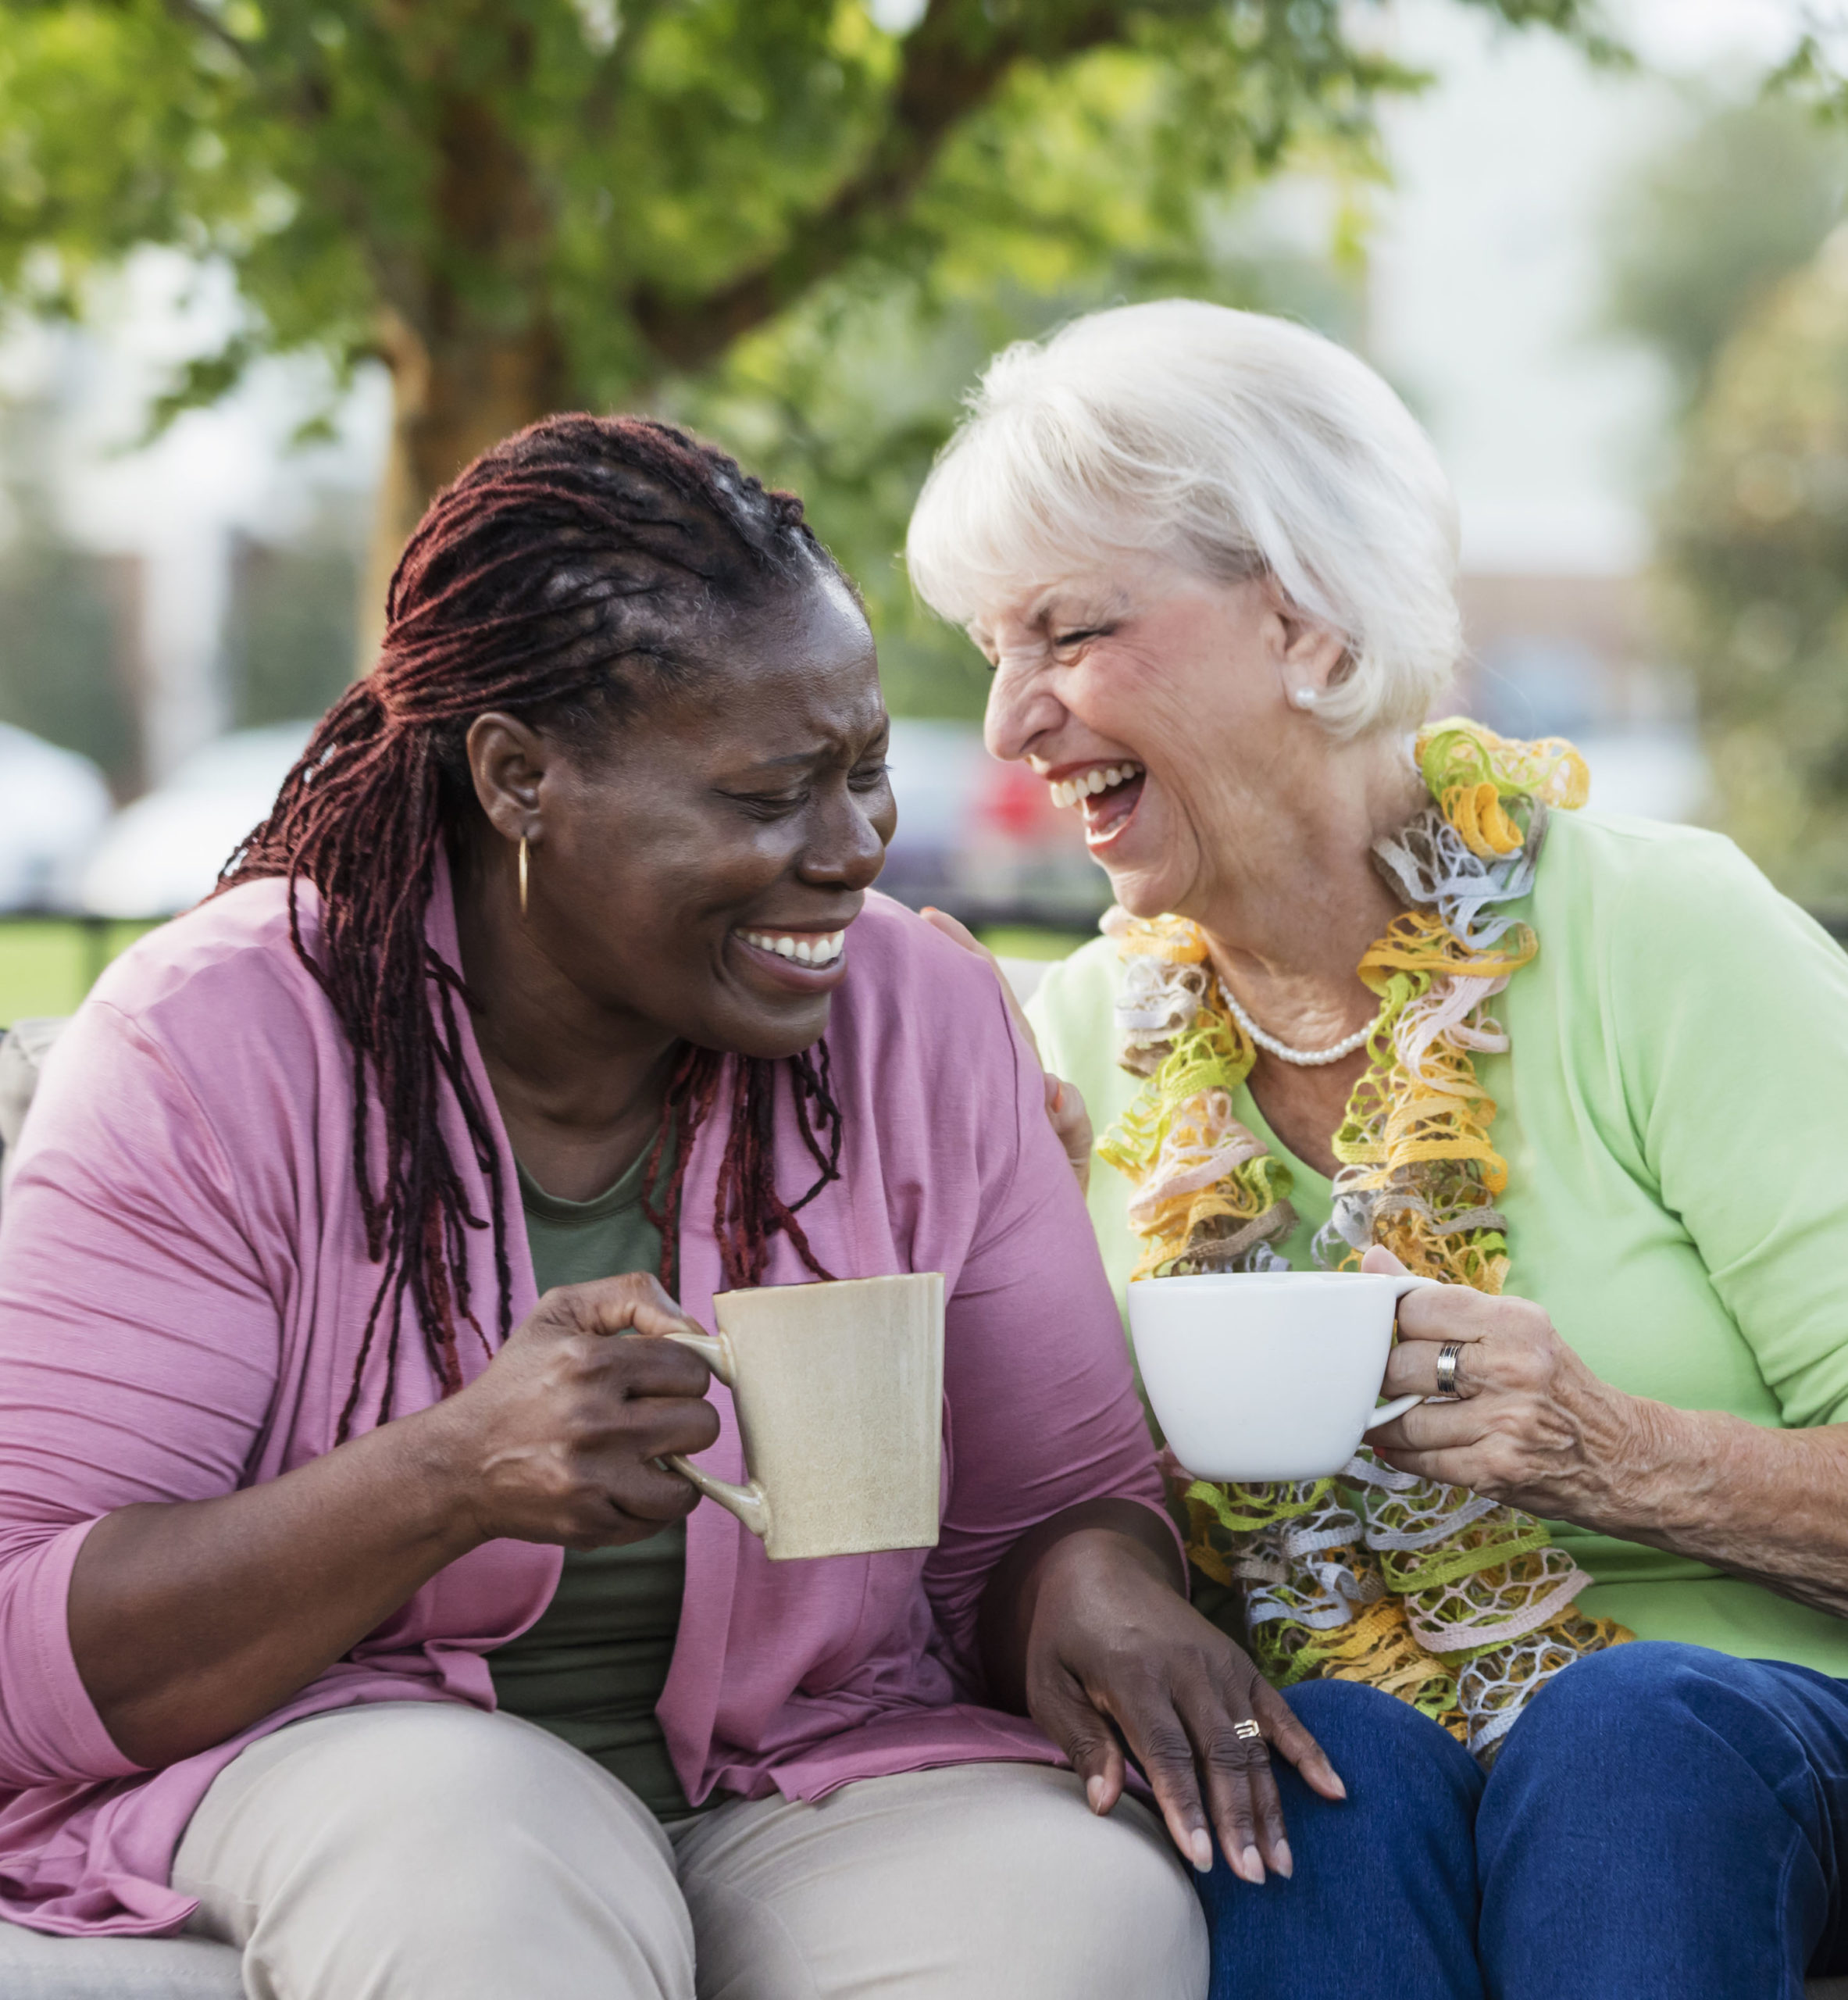 A senior woman in her 70s, drinking coffee and laughing with her African-American friend, a mature woman in her 50s. They are sitting outdoors on a patio sofa.